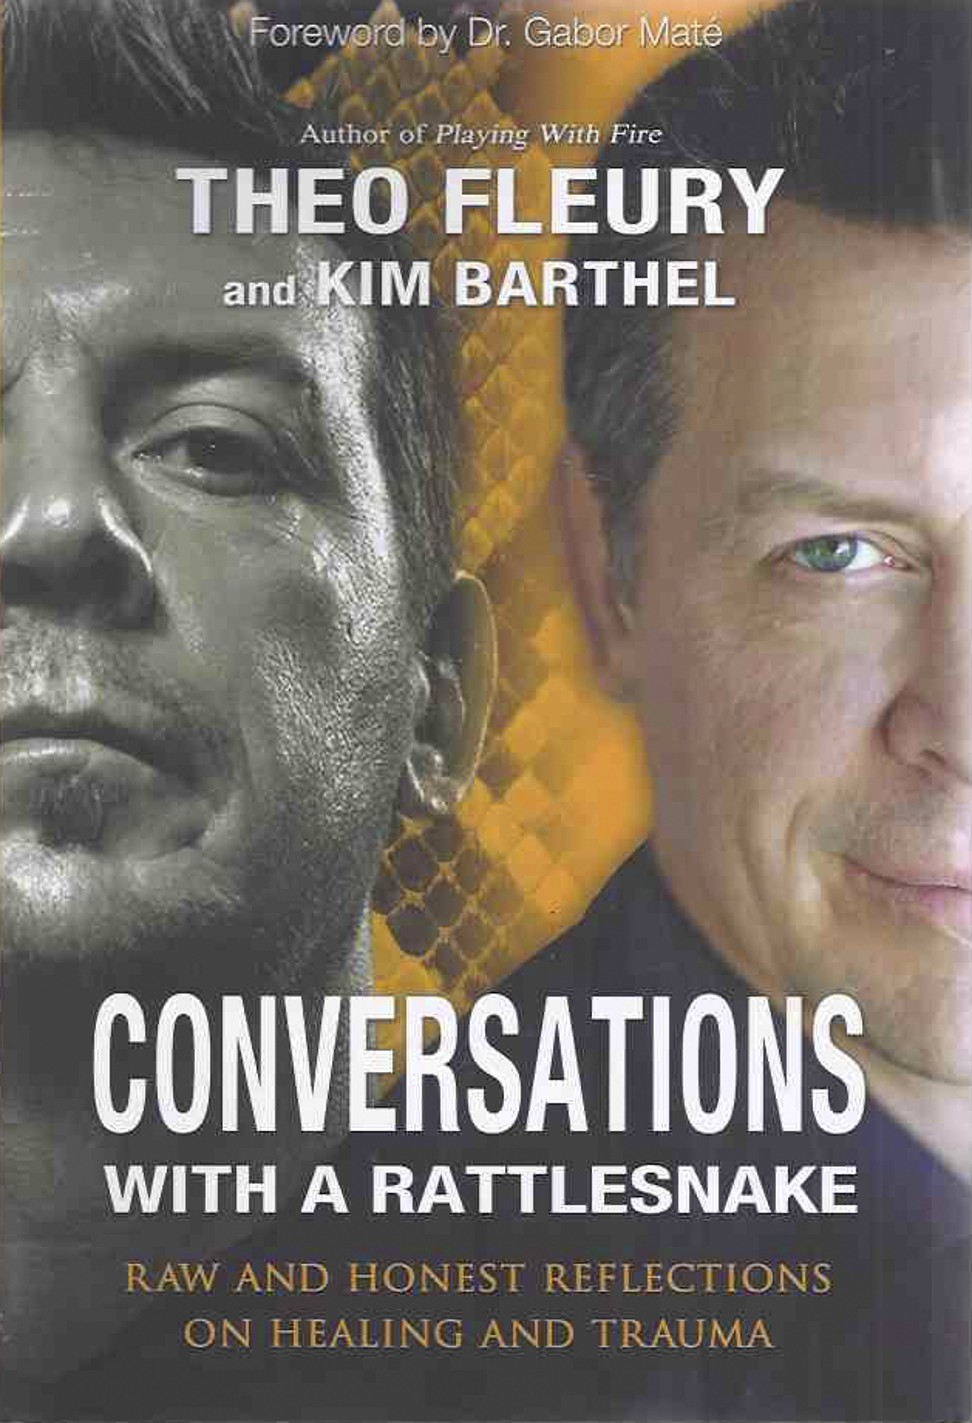 Conversations with a Rattlesnake: Raw and Honest Reflections on Healing and Trauma (2014). Photo: Handout